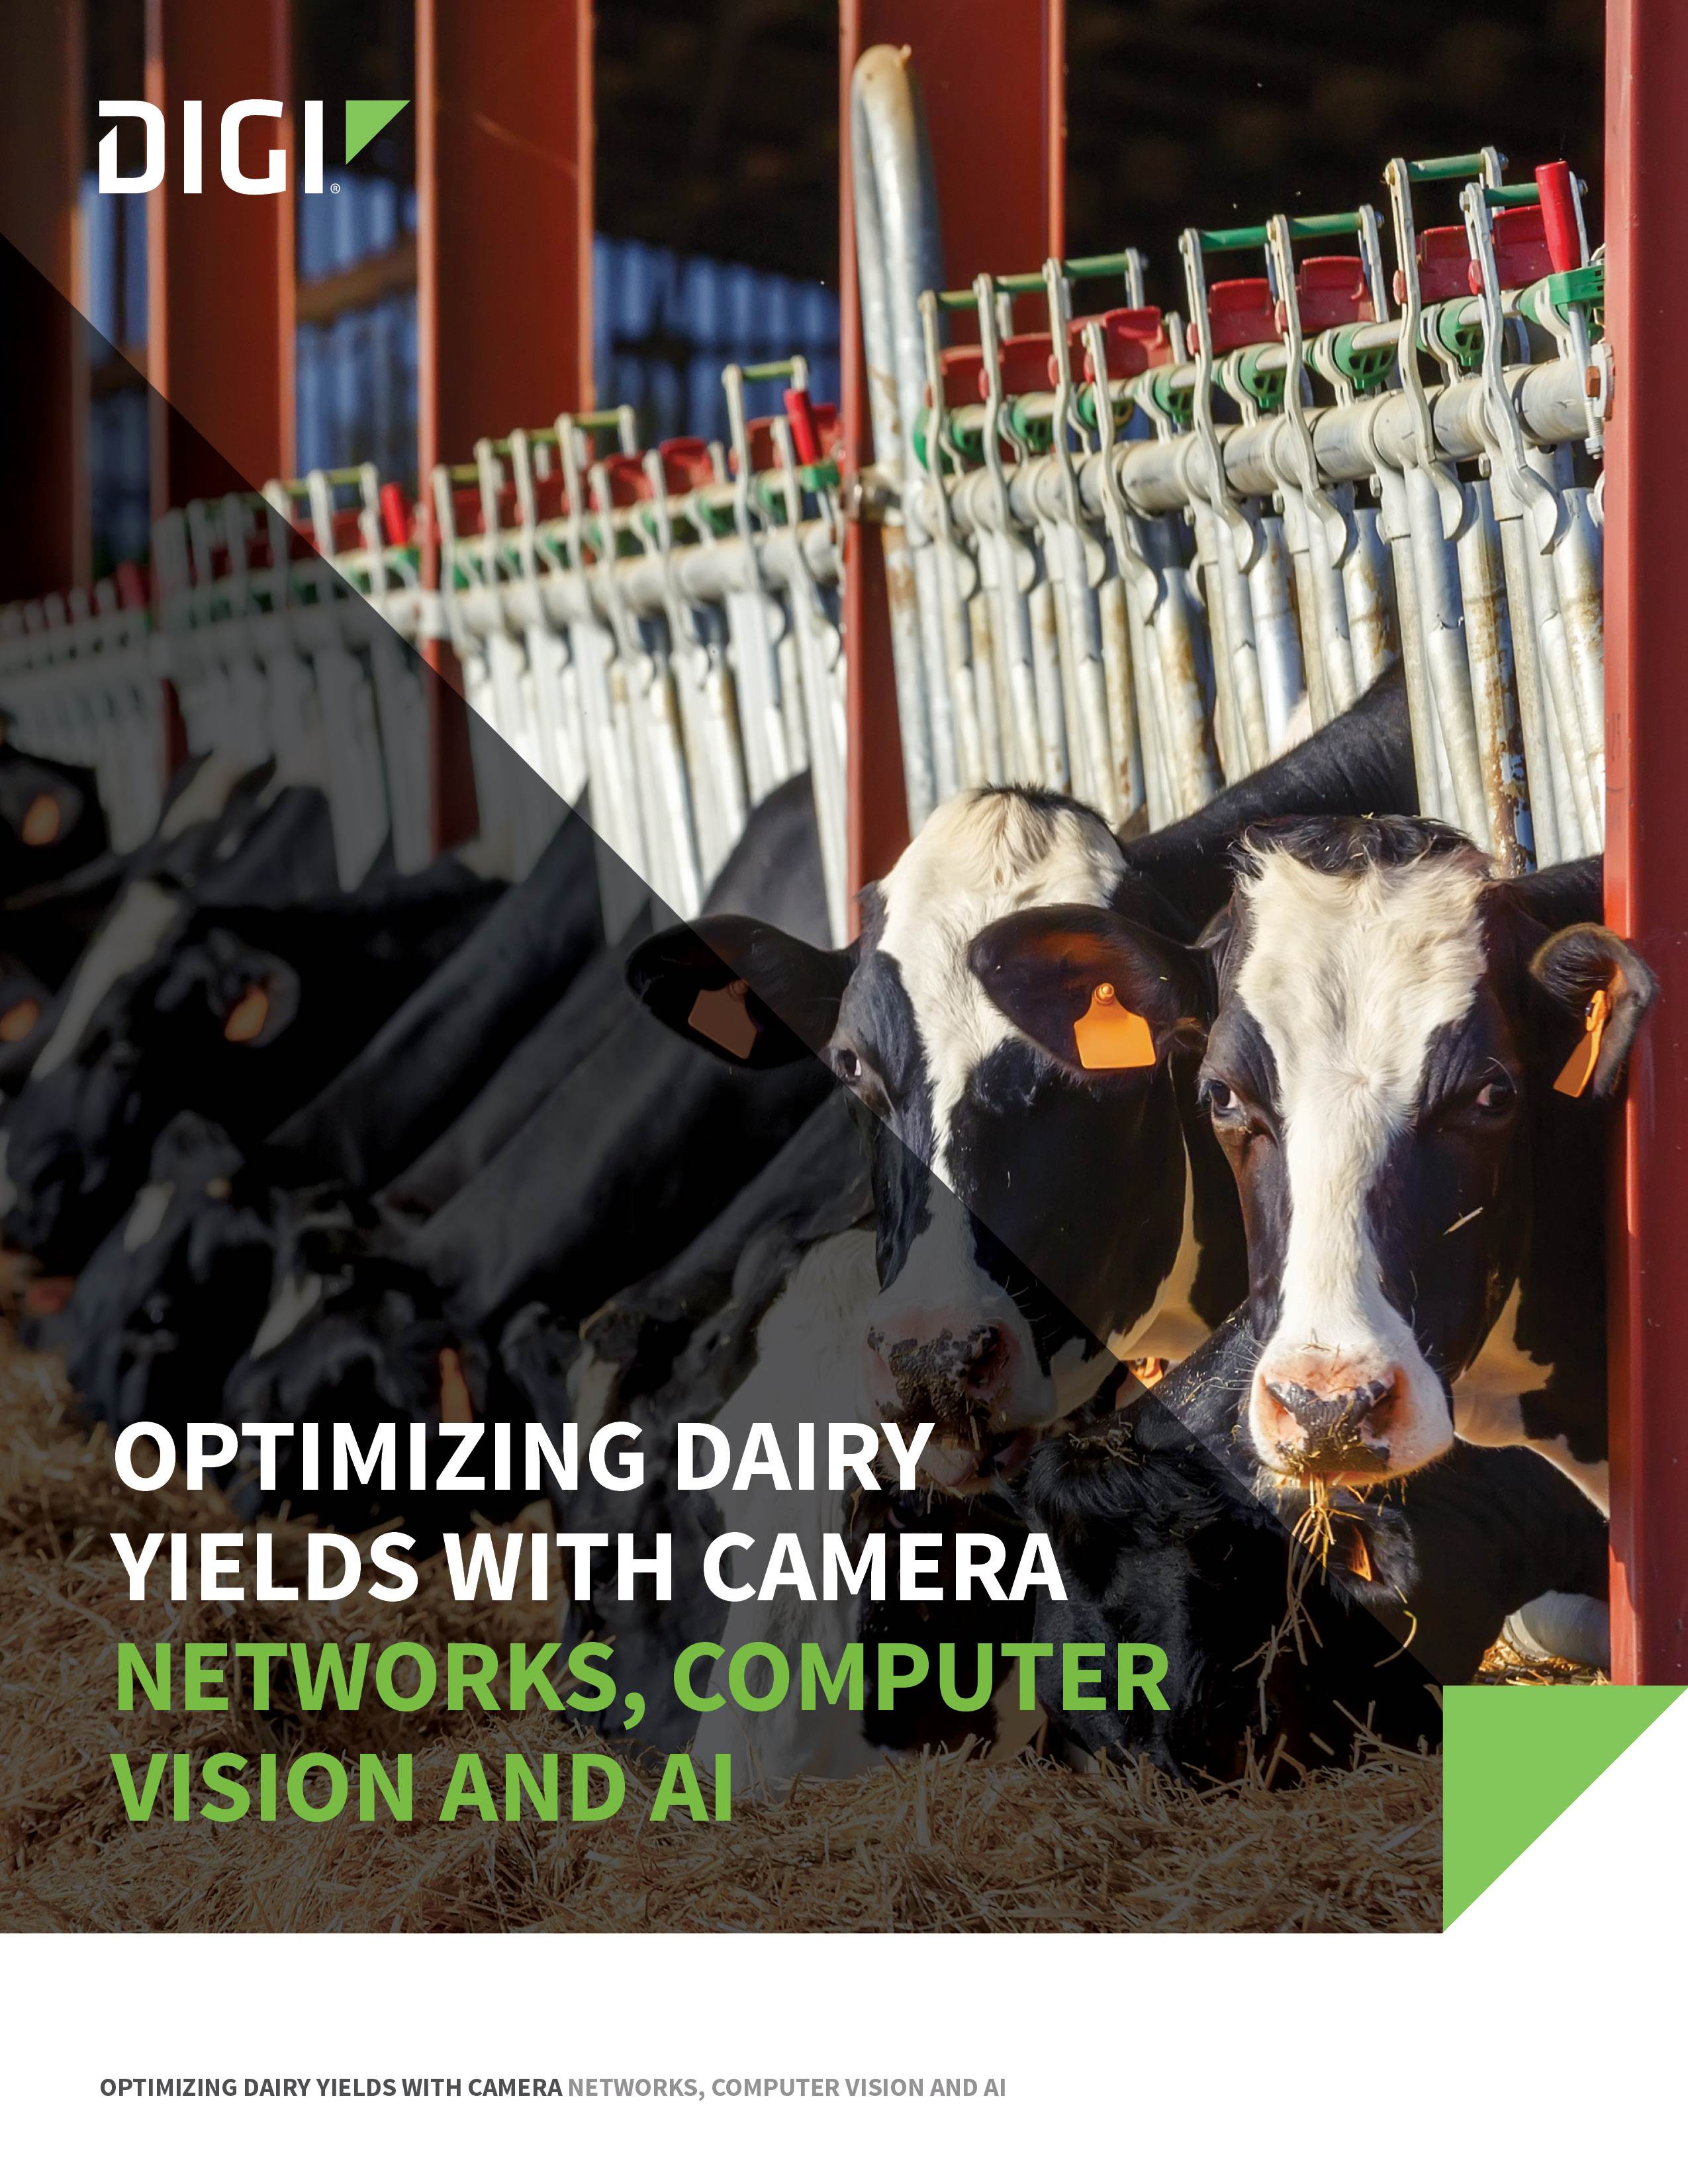 Optimizing Dairy Yields with Camera Networks, Computer Vision and AI